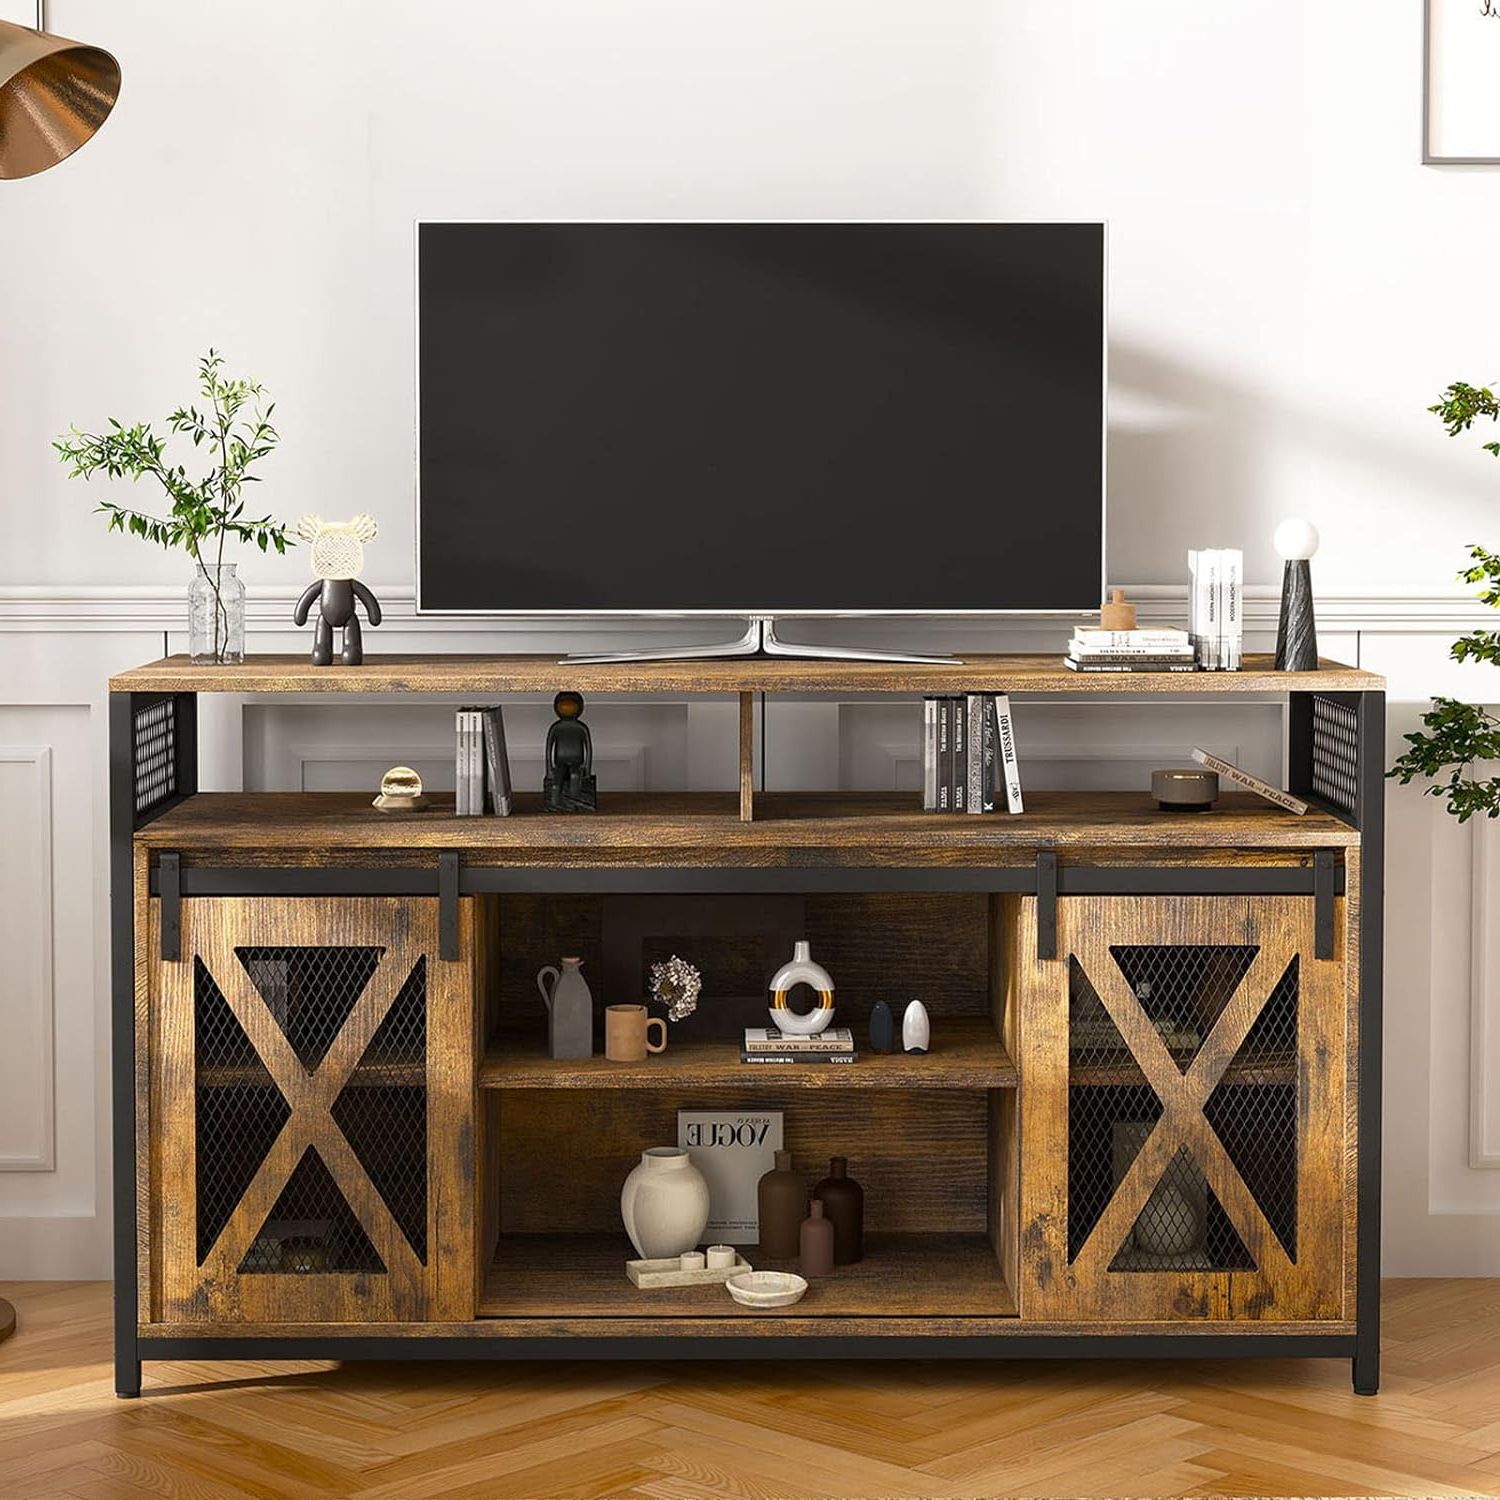 Nolany Tv Stand With Sliding Barn Doors, India | Ubuy With Barn Door Media Tv Stands (View 12 of 20)